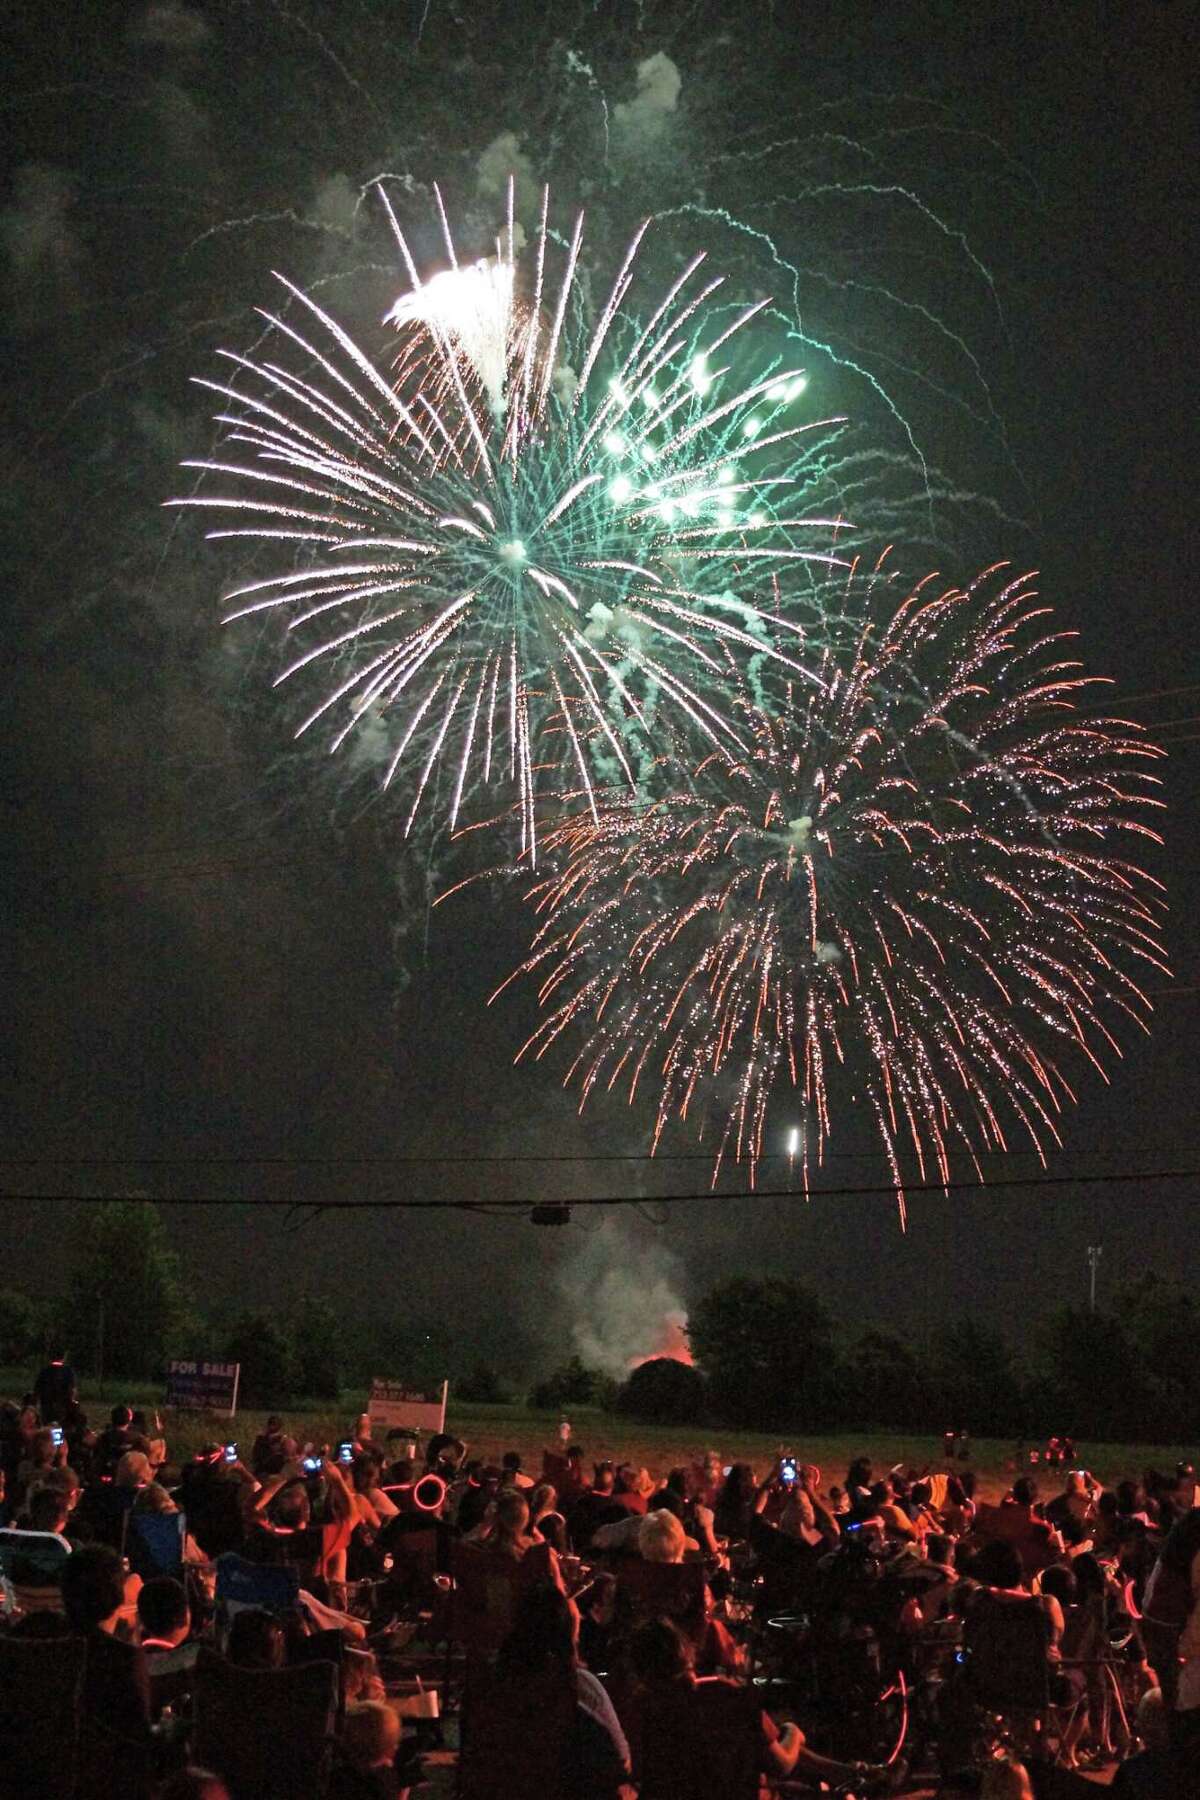 As of June 24, the City of Tomball’s July 4th Celebration and Street Festival, dubbed as ‘the biggest Independence Day event in northwest Harris Count,’ is planned to be held that Monday evening as regularly scheduled.